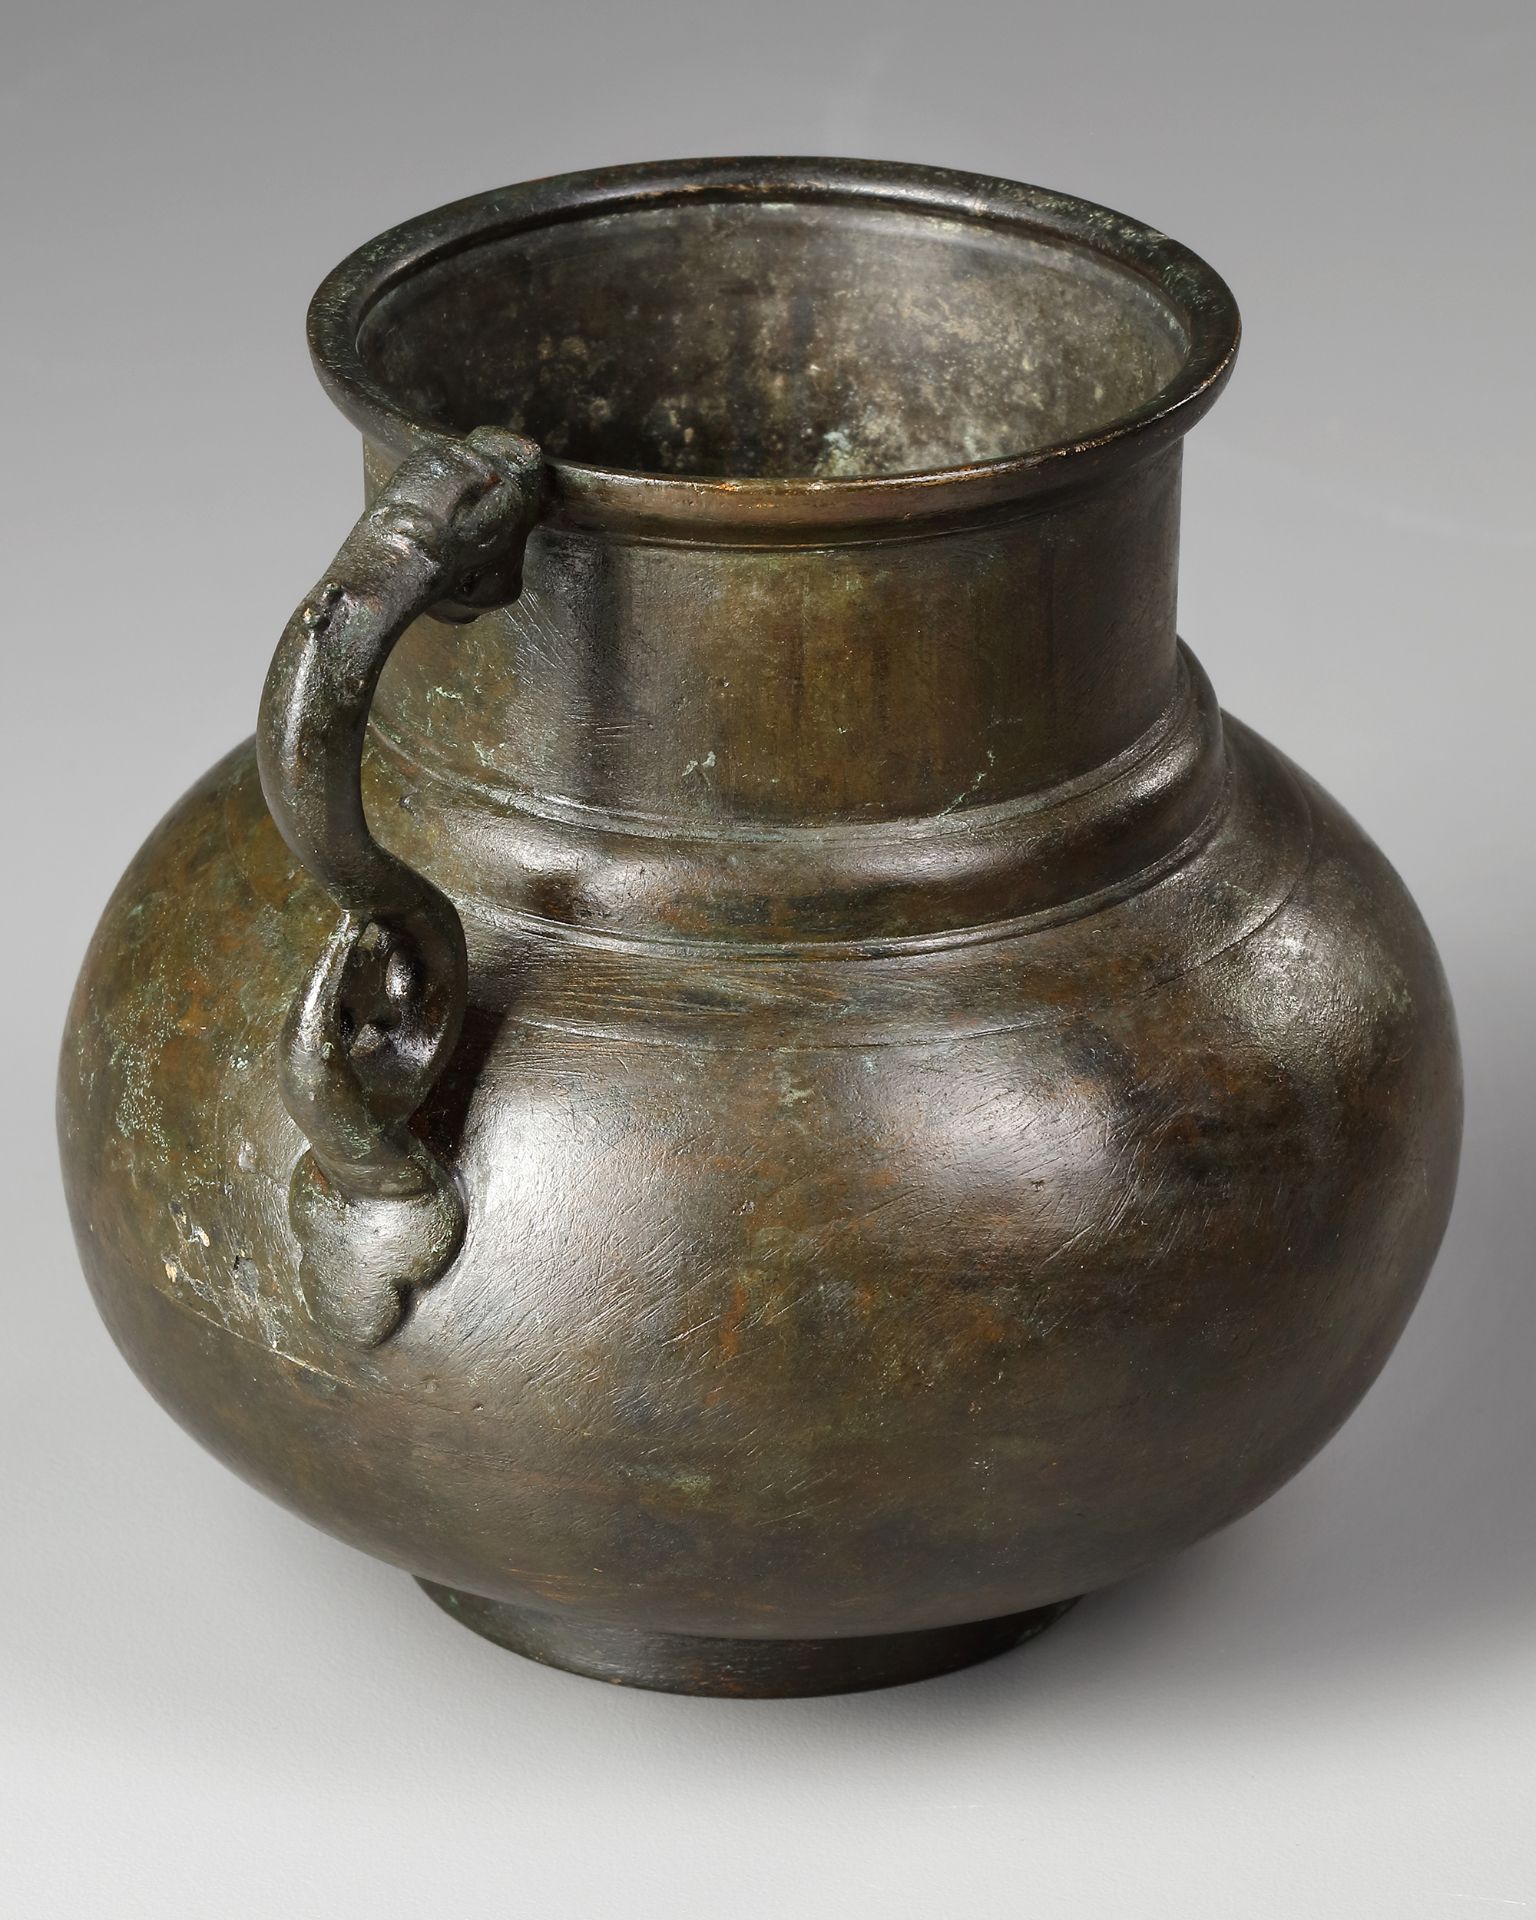 A TIMURID DRAGON-HANDLED JUG, CENTRAL ASIA, LATE 14TH- EARLY 15TH CENTURY - Image 4 of 6